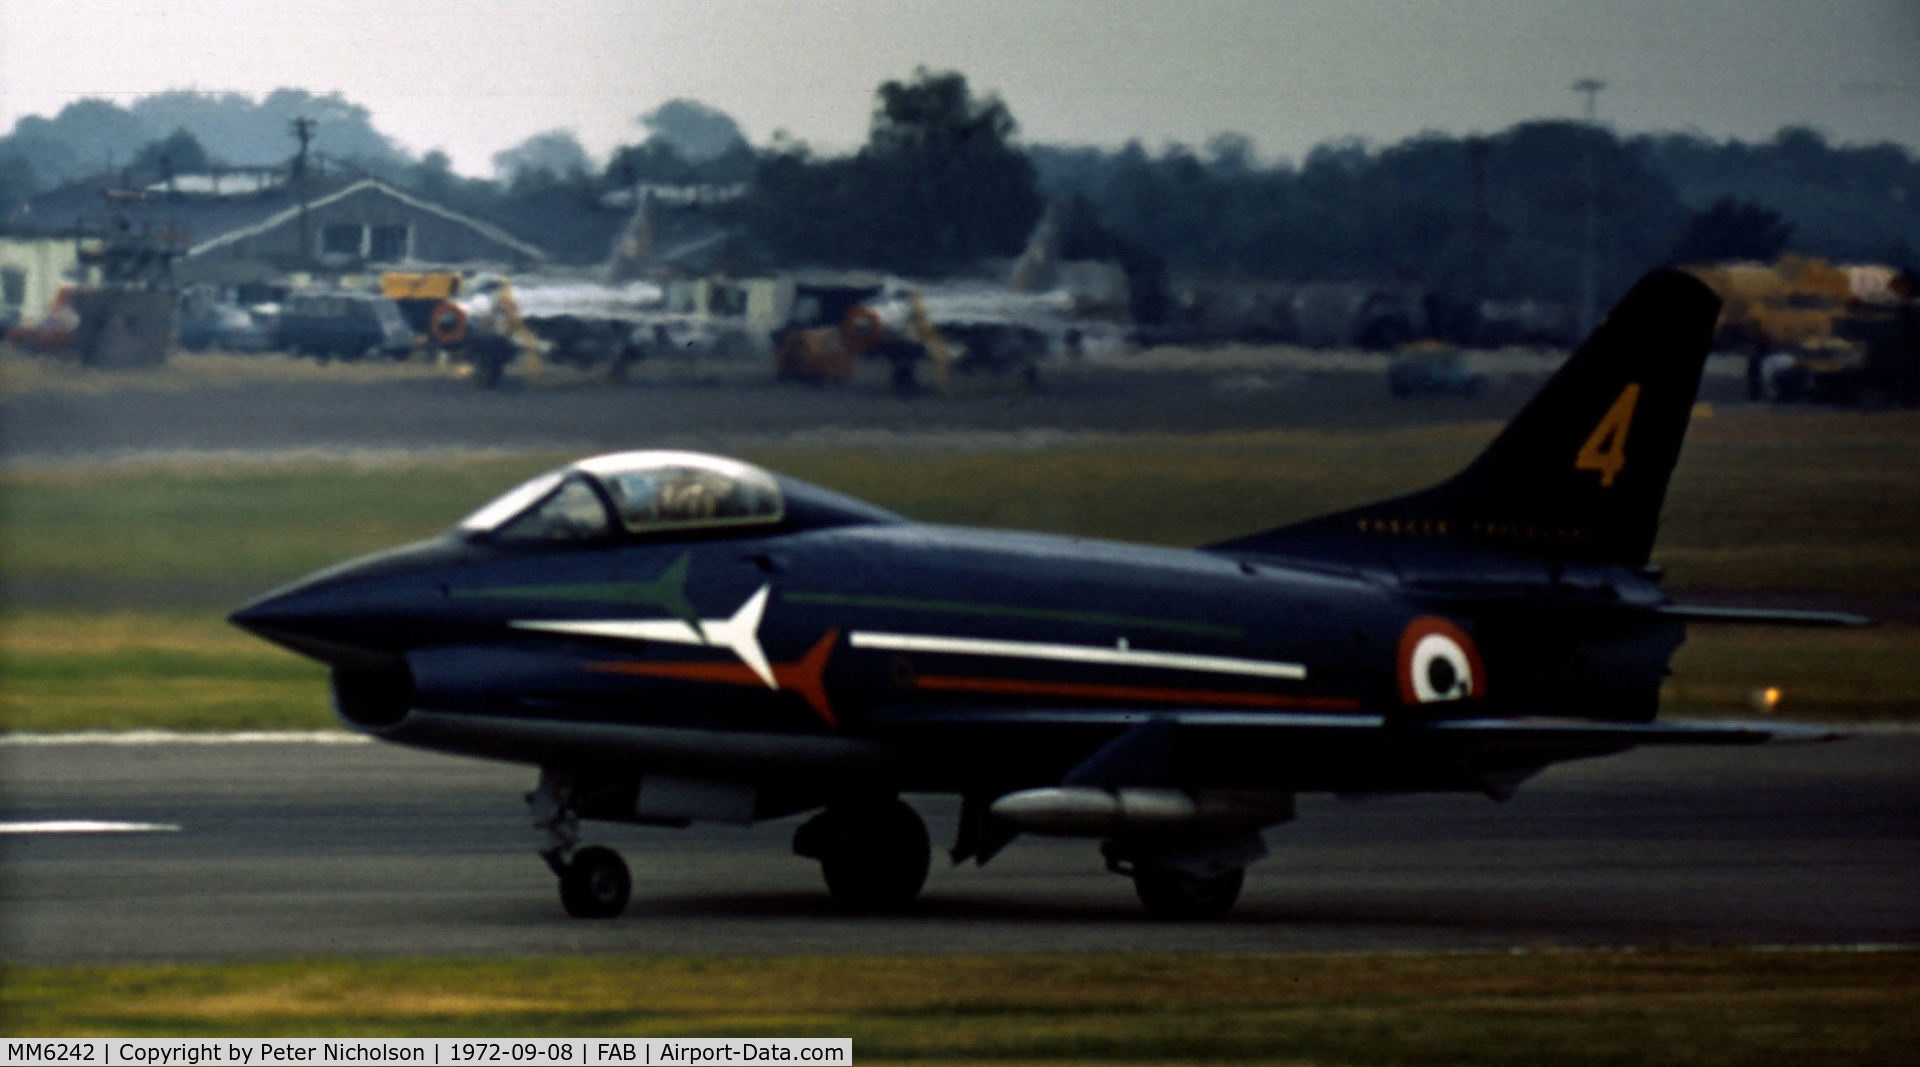 MM6242, Fiat G-91PAN C/N 8, Fiat G-91PAN number 4 of the Italian Air Force's Frecce Tricolori flight demonstration team in action at the 1972 Farnborough Airshow.